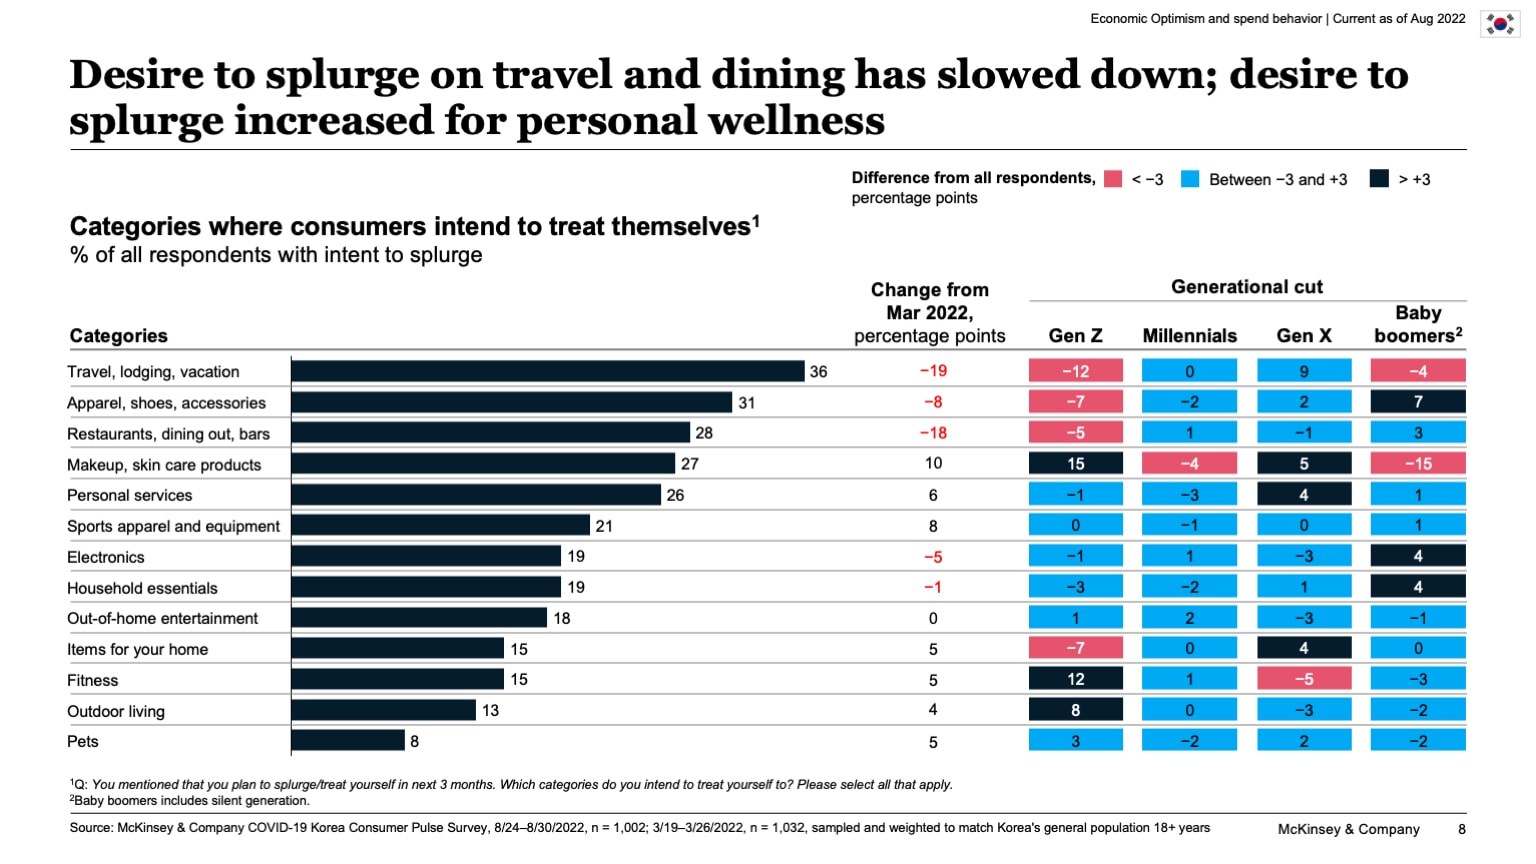 Desire to splurge on travel and dining has slowed down; desire to splurge increased for personal wellness